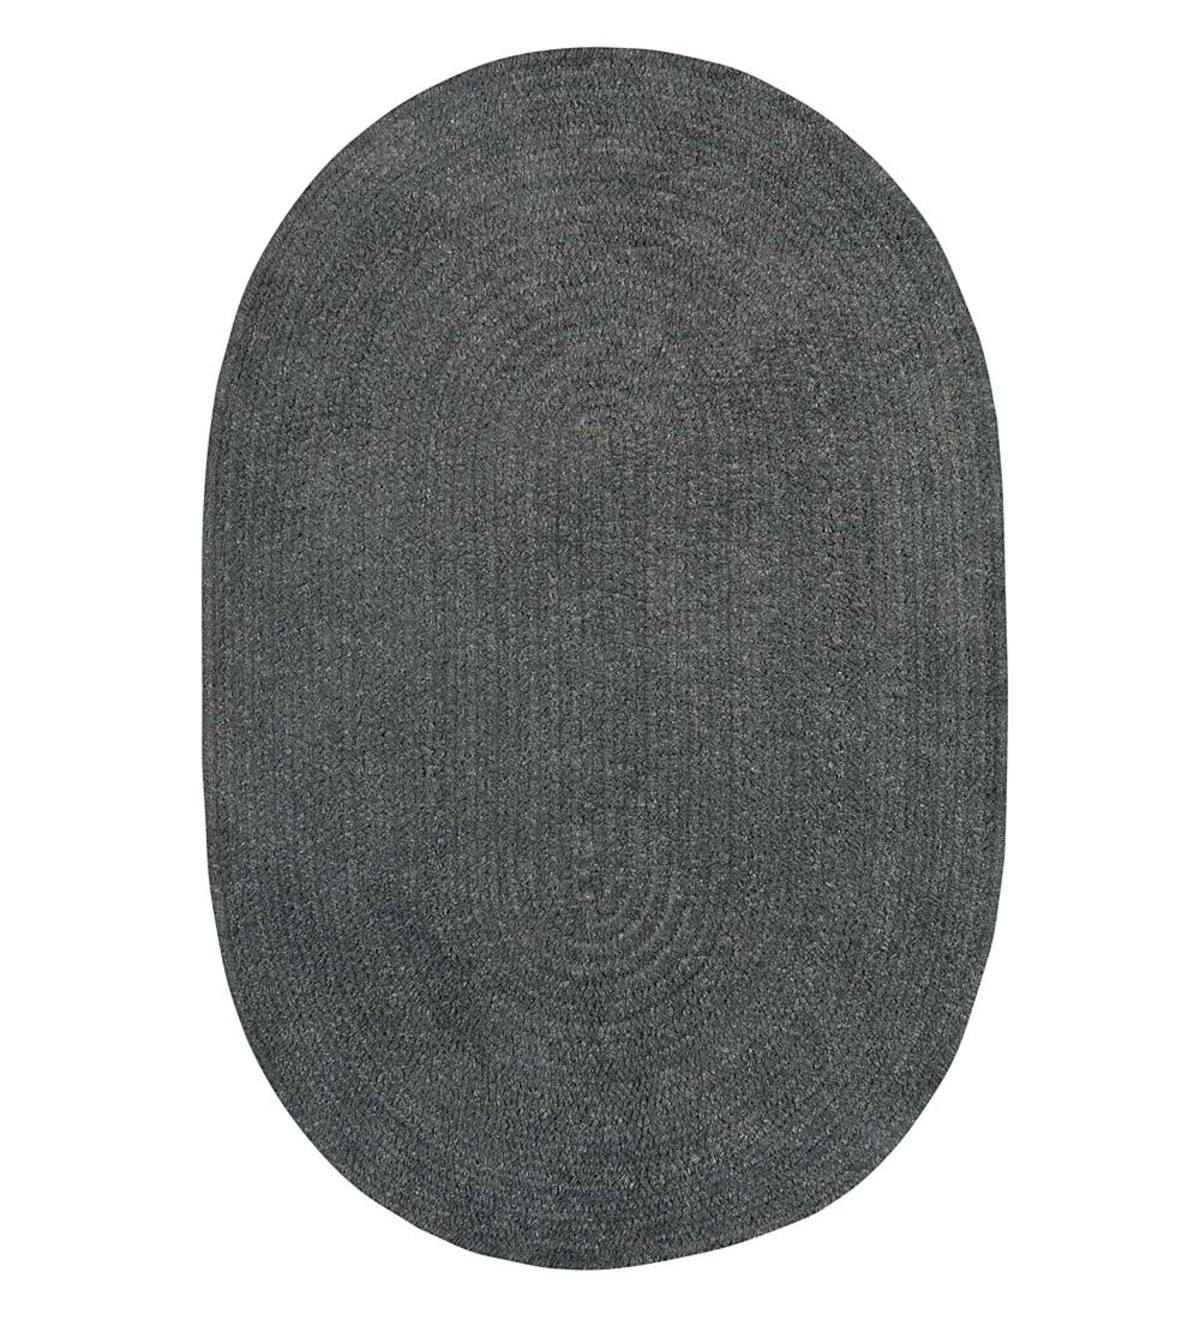 Chenille Oval Braided Area Rug, 8' x 11' - Charcoal